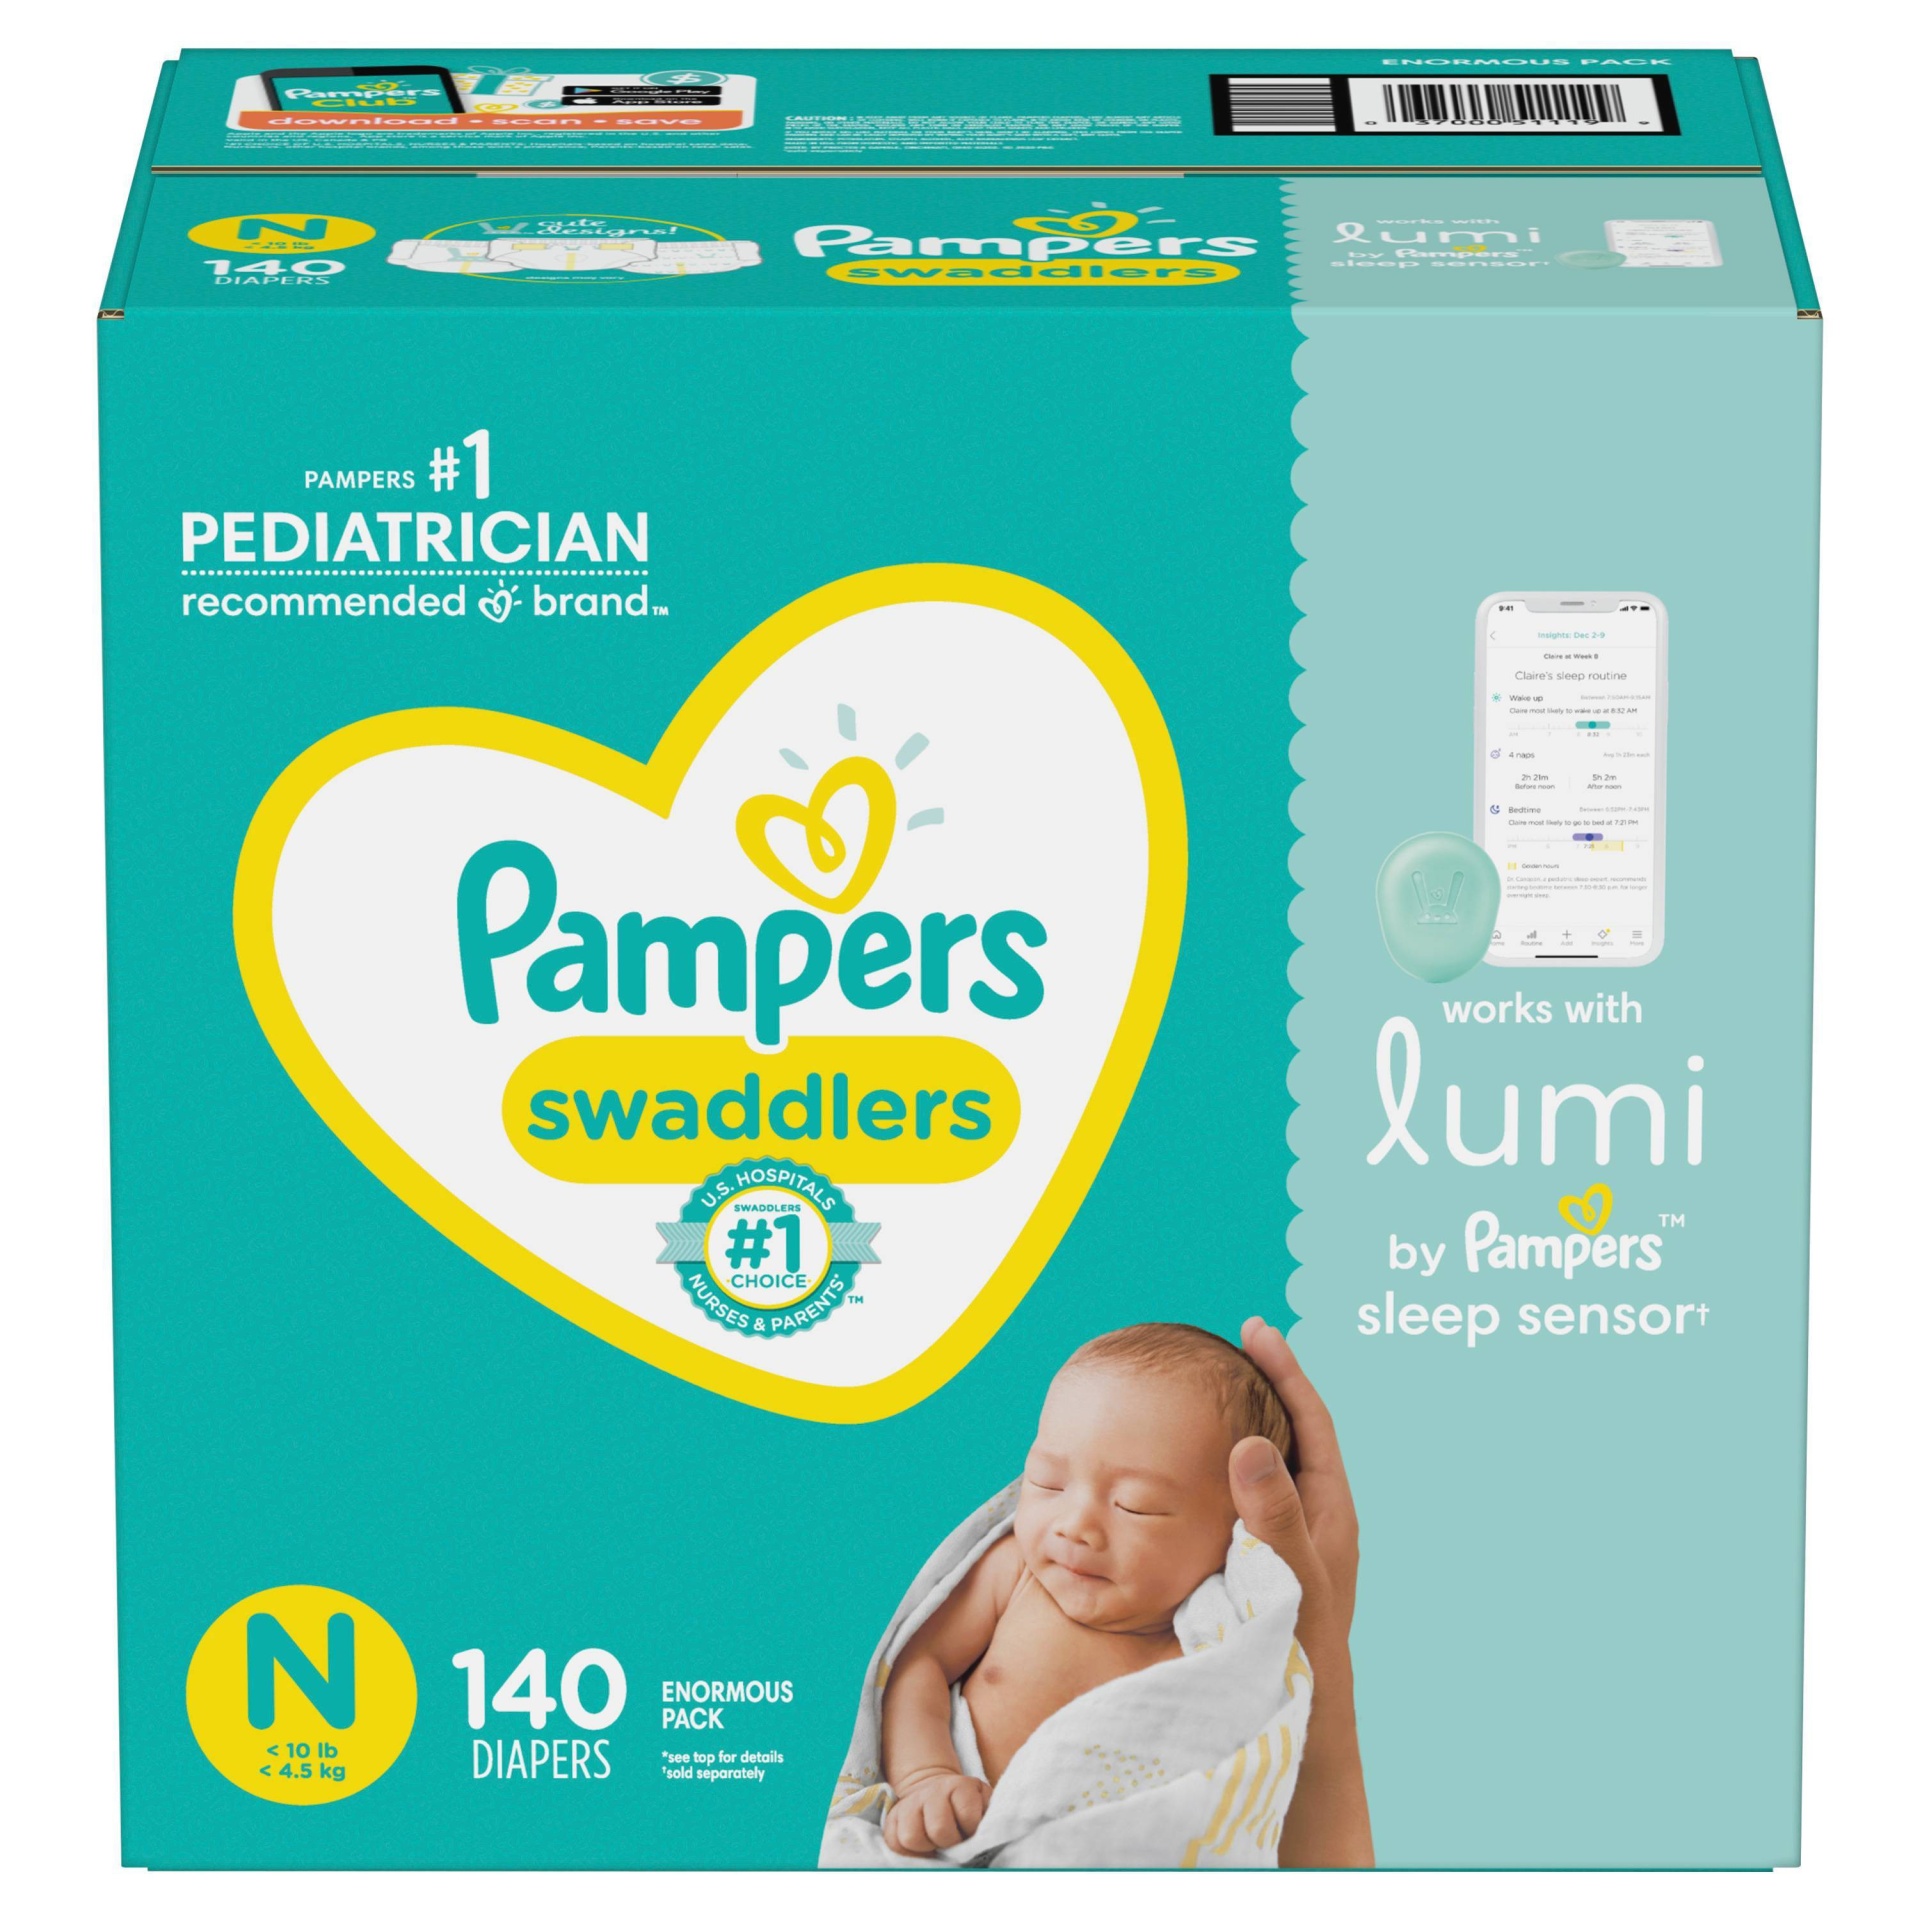 Pampers Lumi Swaddlers Enormous Pack Diapers - Size Newborn 140 ct | Shipt